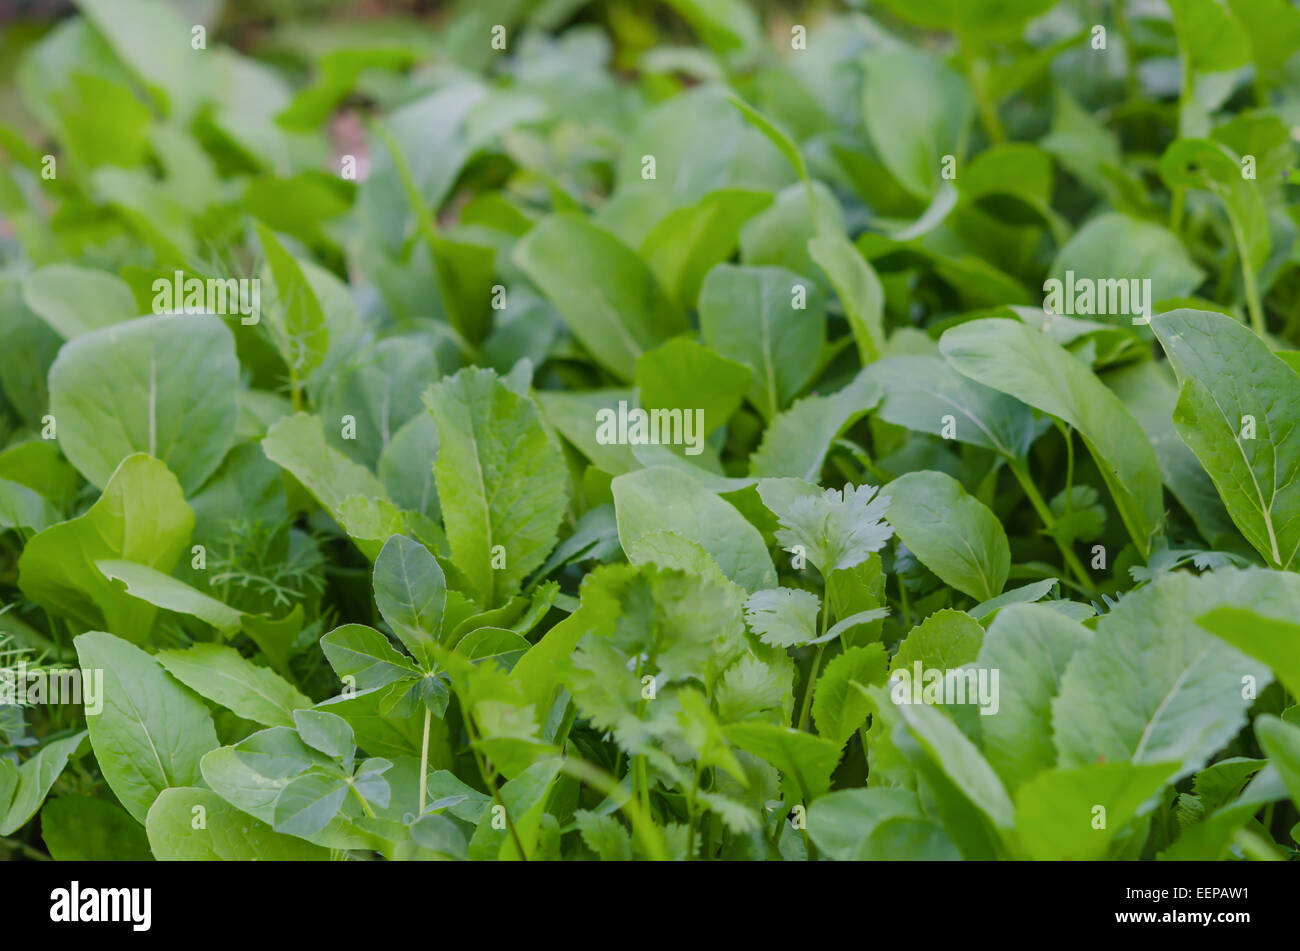 Green vegetable in garden, Choy sum, a kind of chinese vegetable. Stock Photo